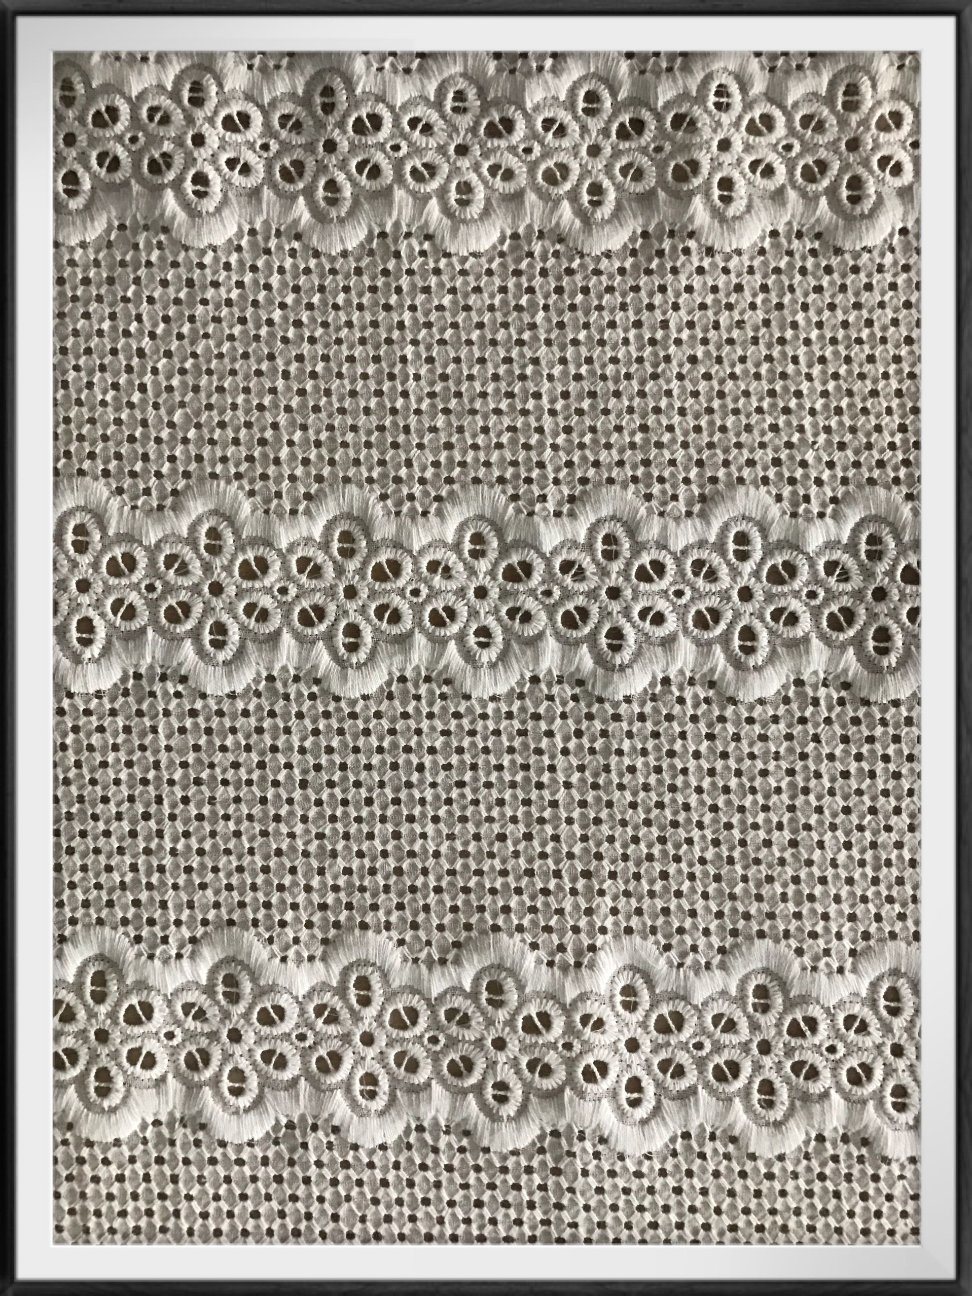 Fation Cotton Fabric Delicate Cotton Eyelet Lace